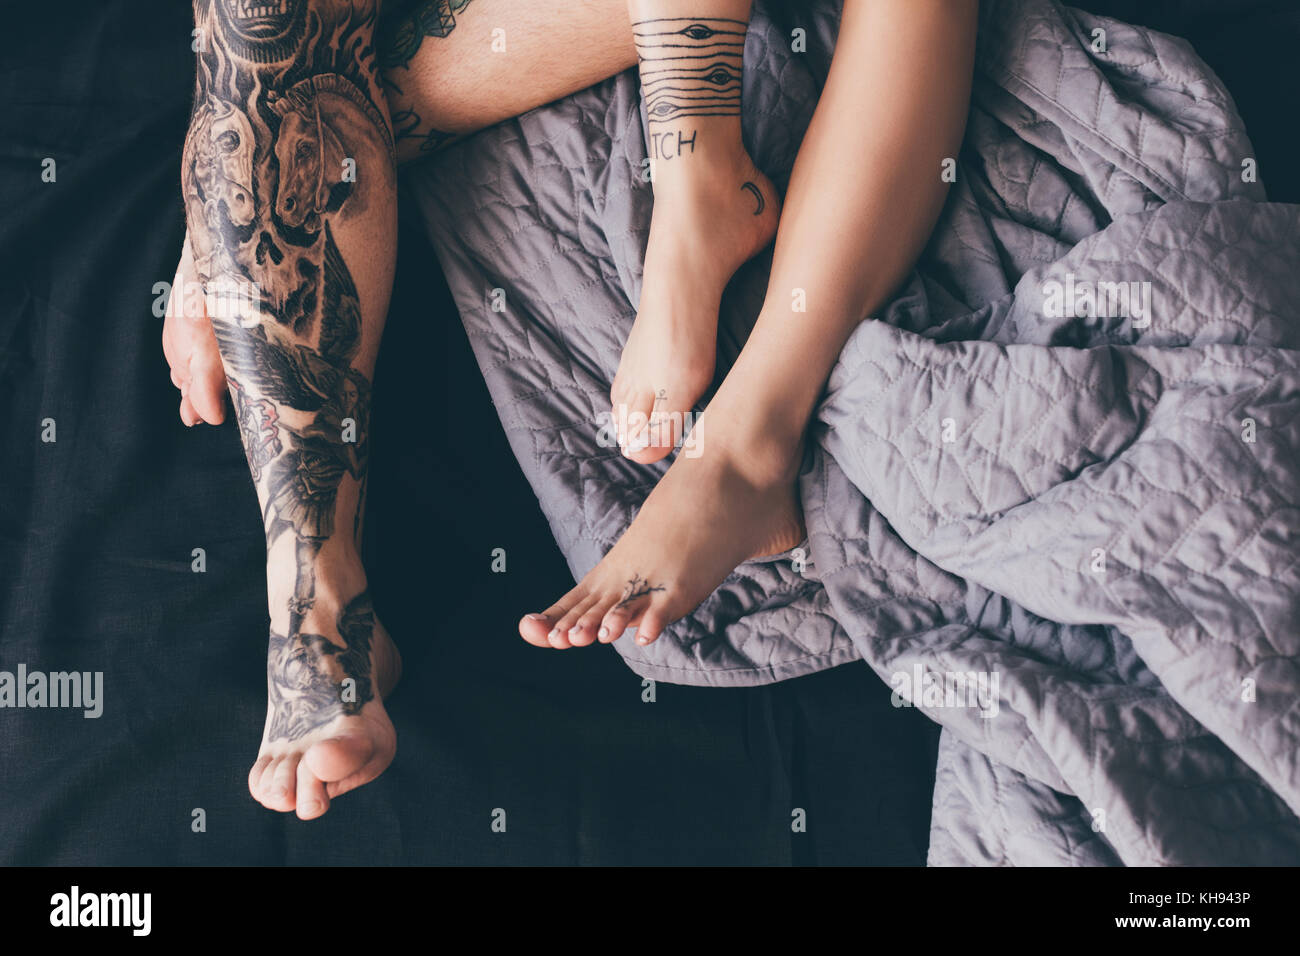 tattooed couple in bed Stock Photo